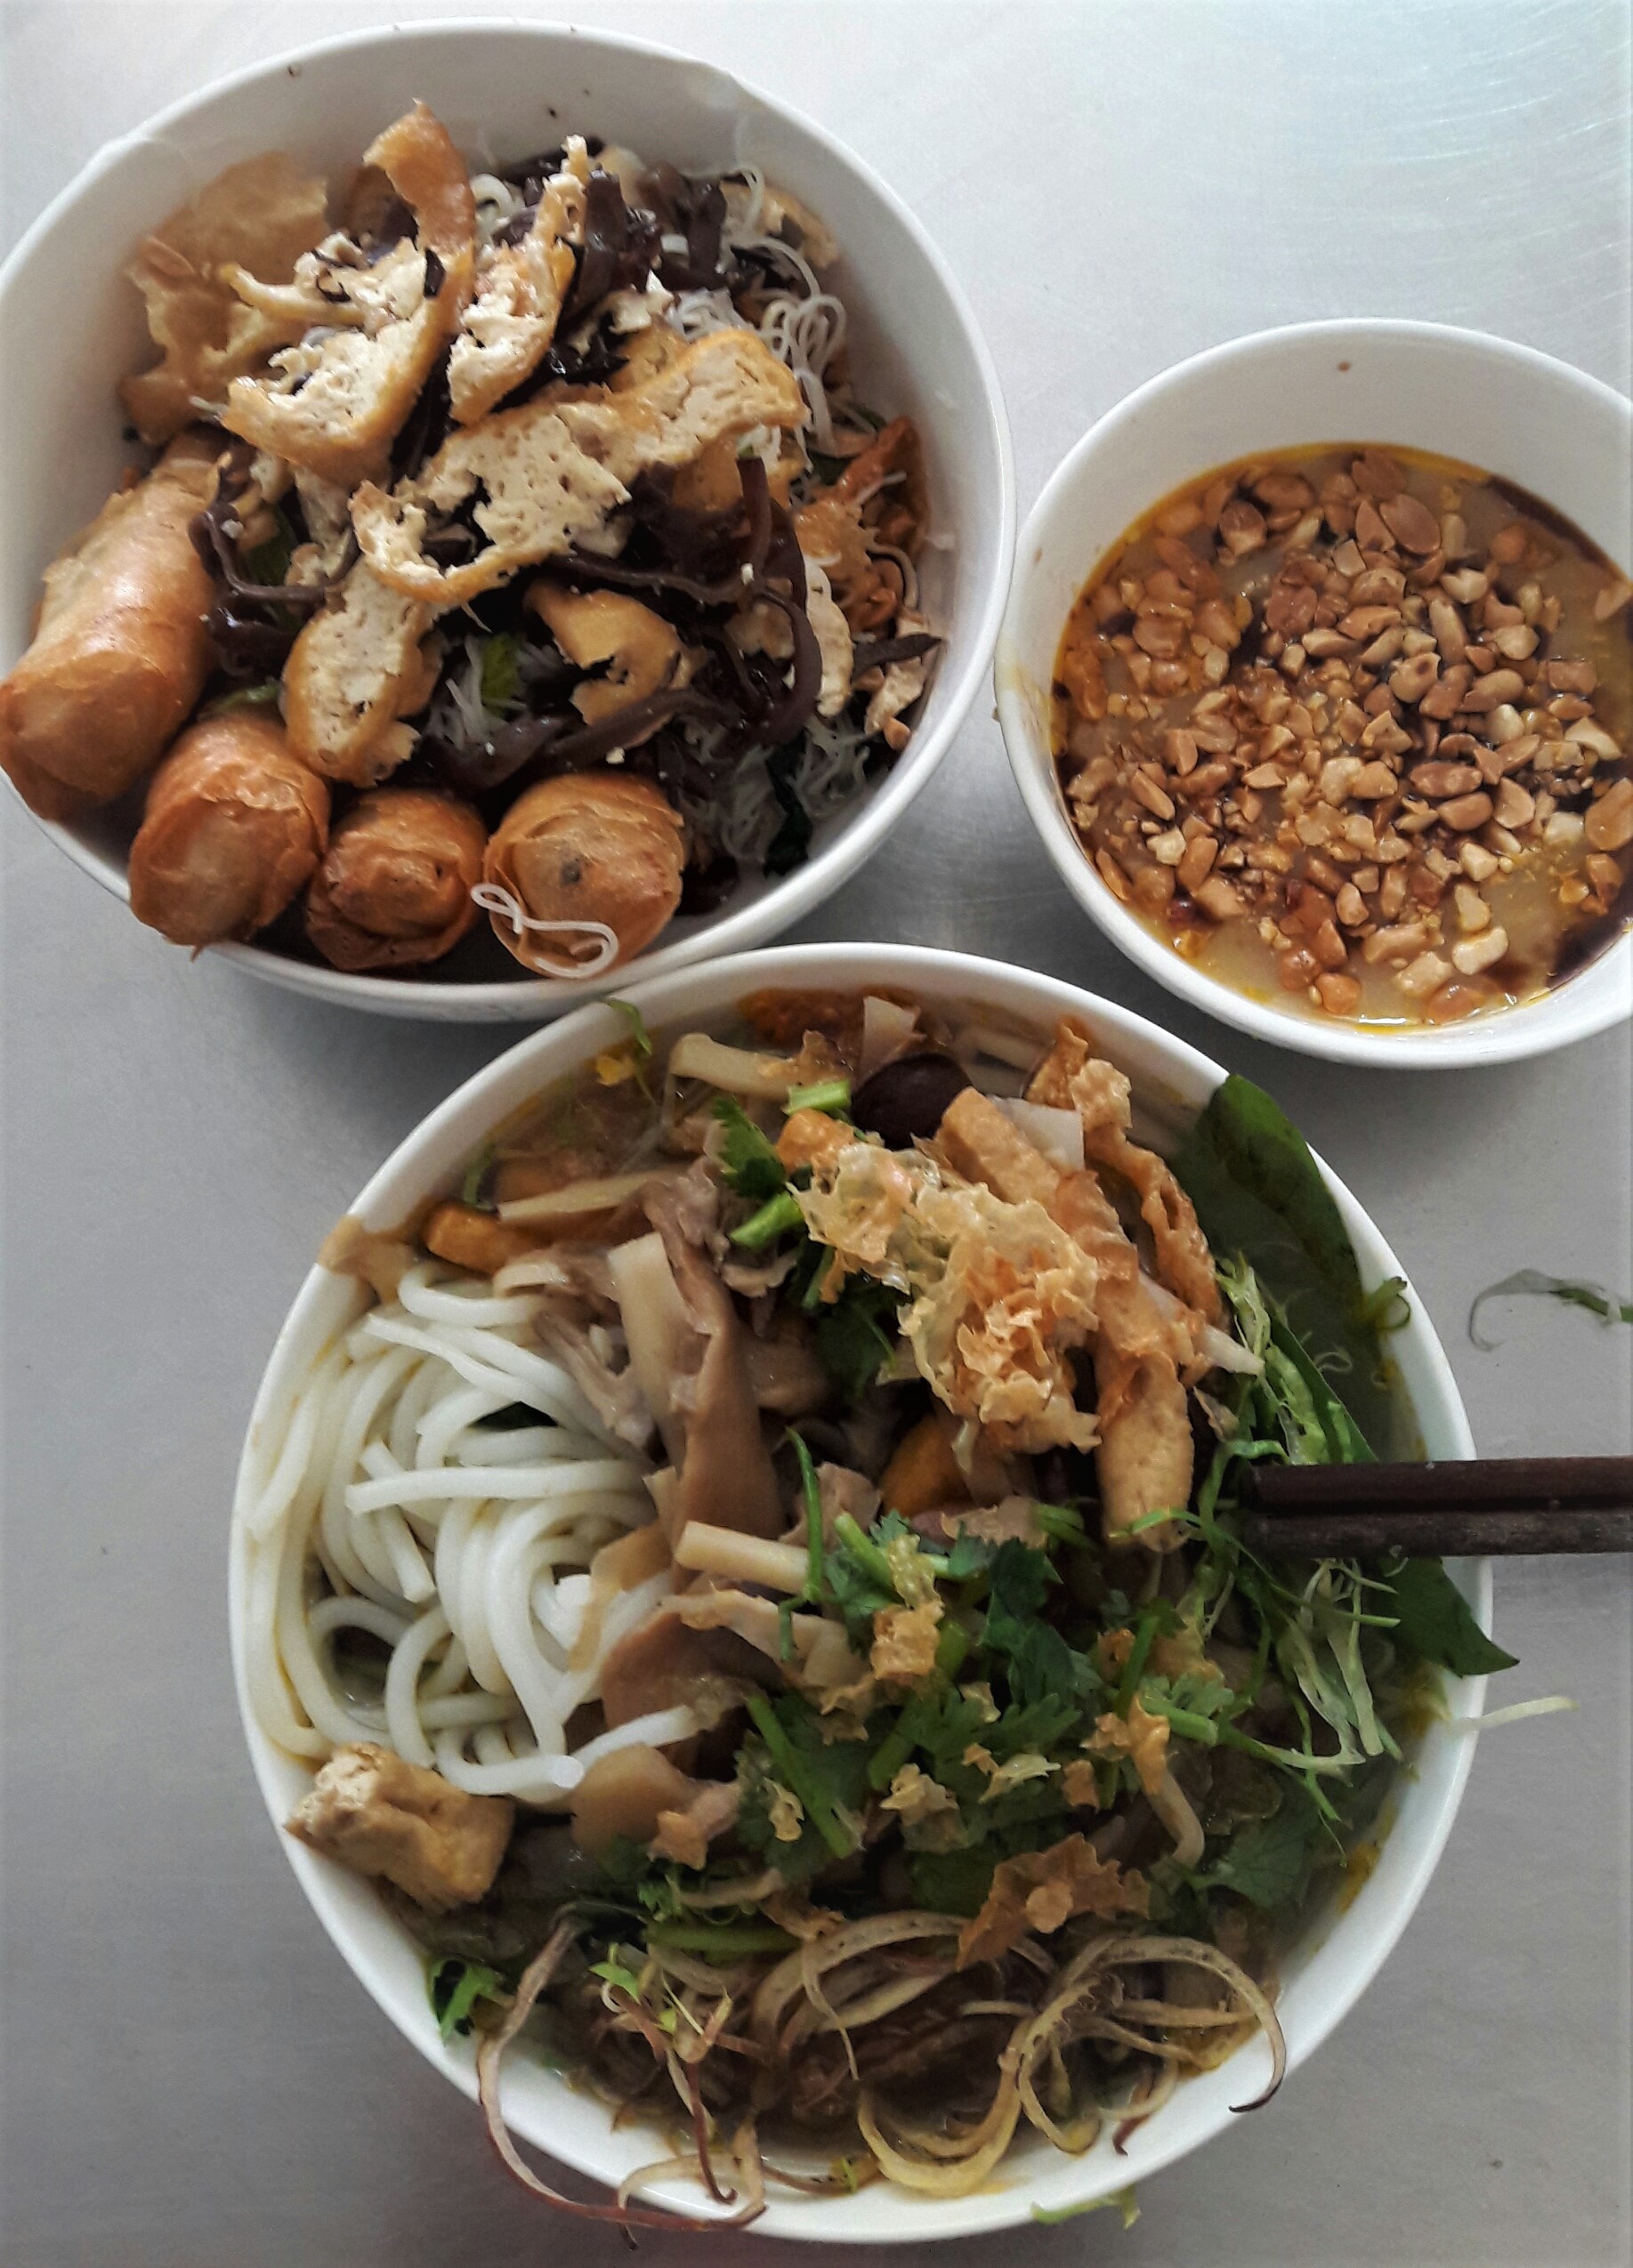 10 reasons why Vietnamese food is my favourite | Tuoi Tre News